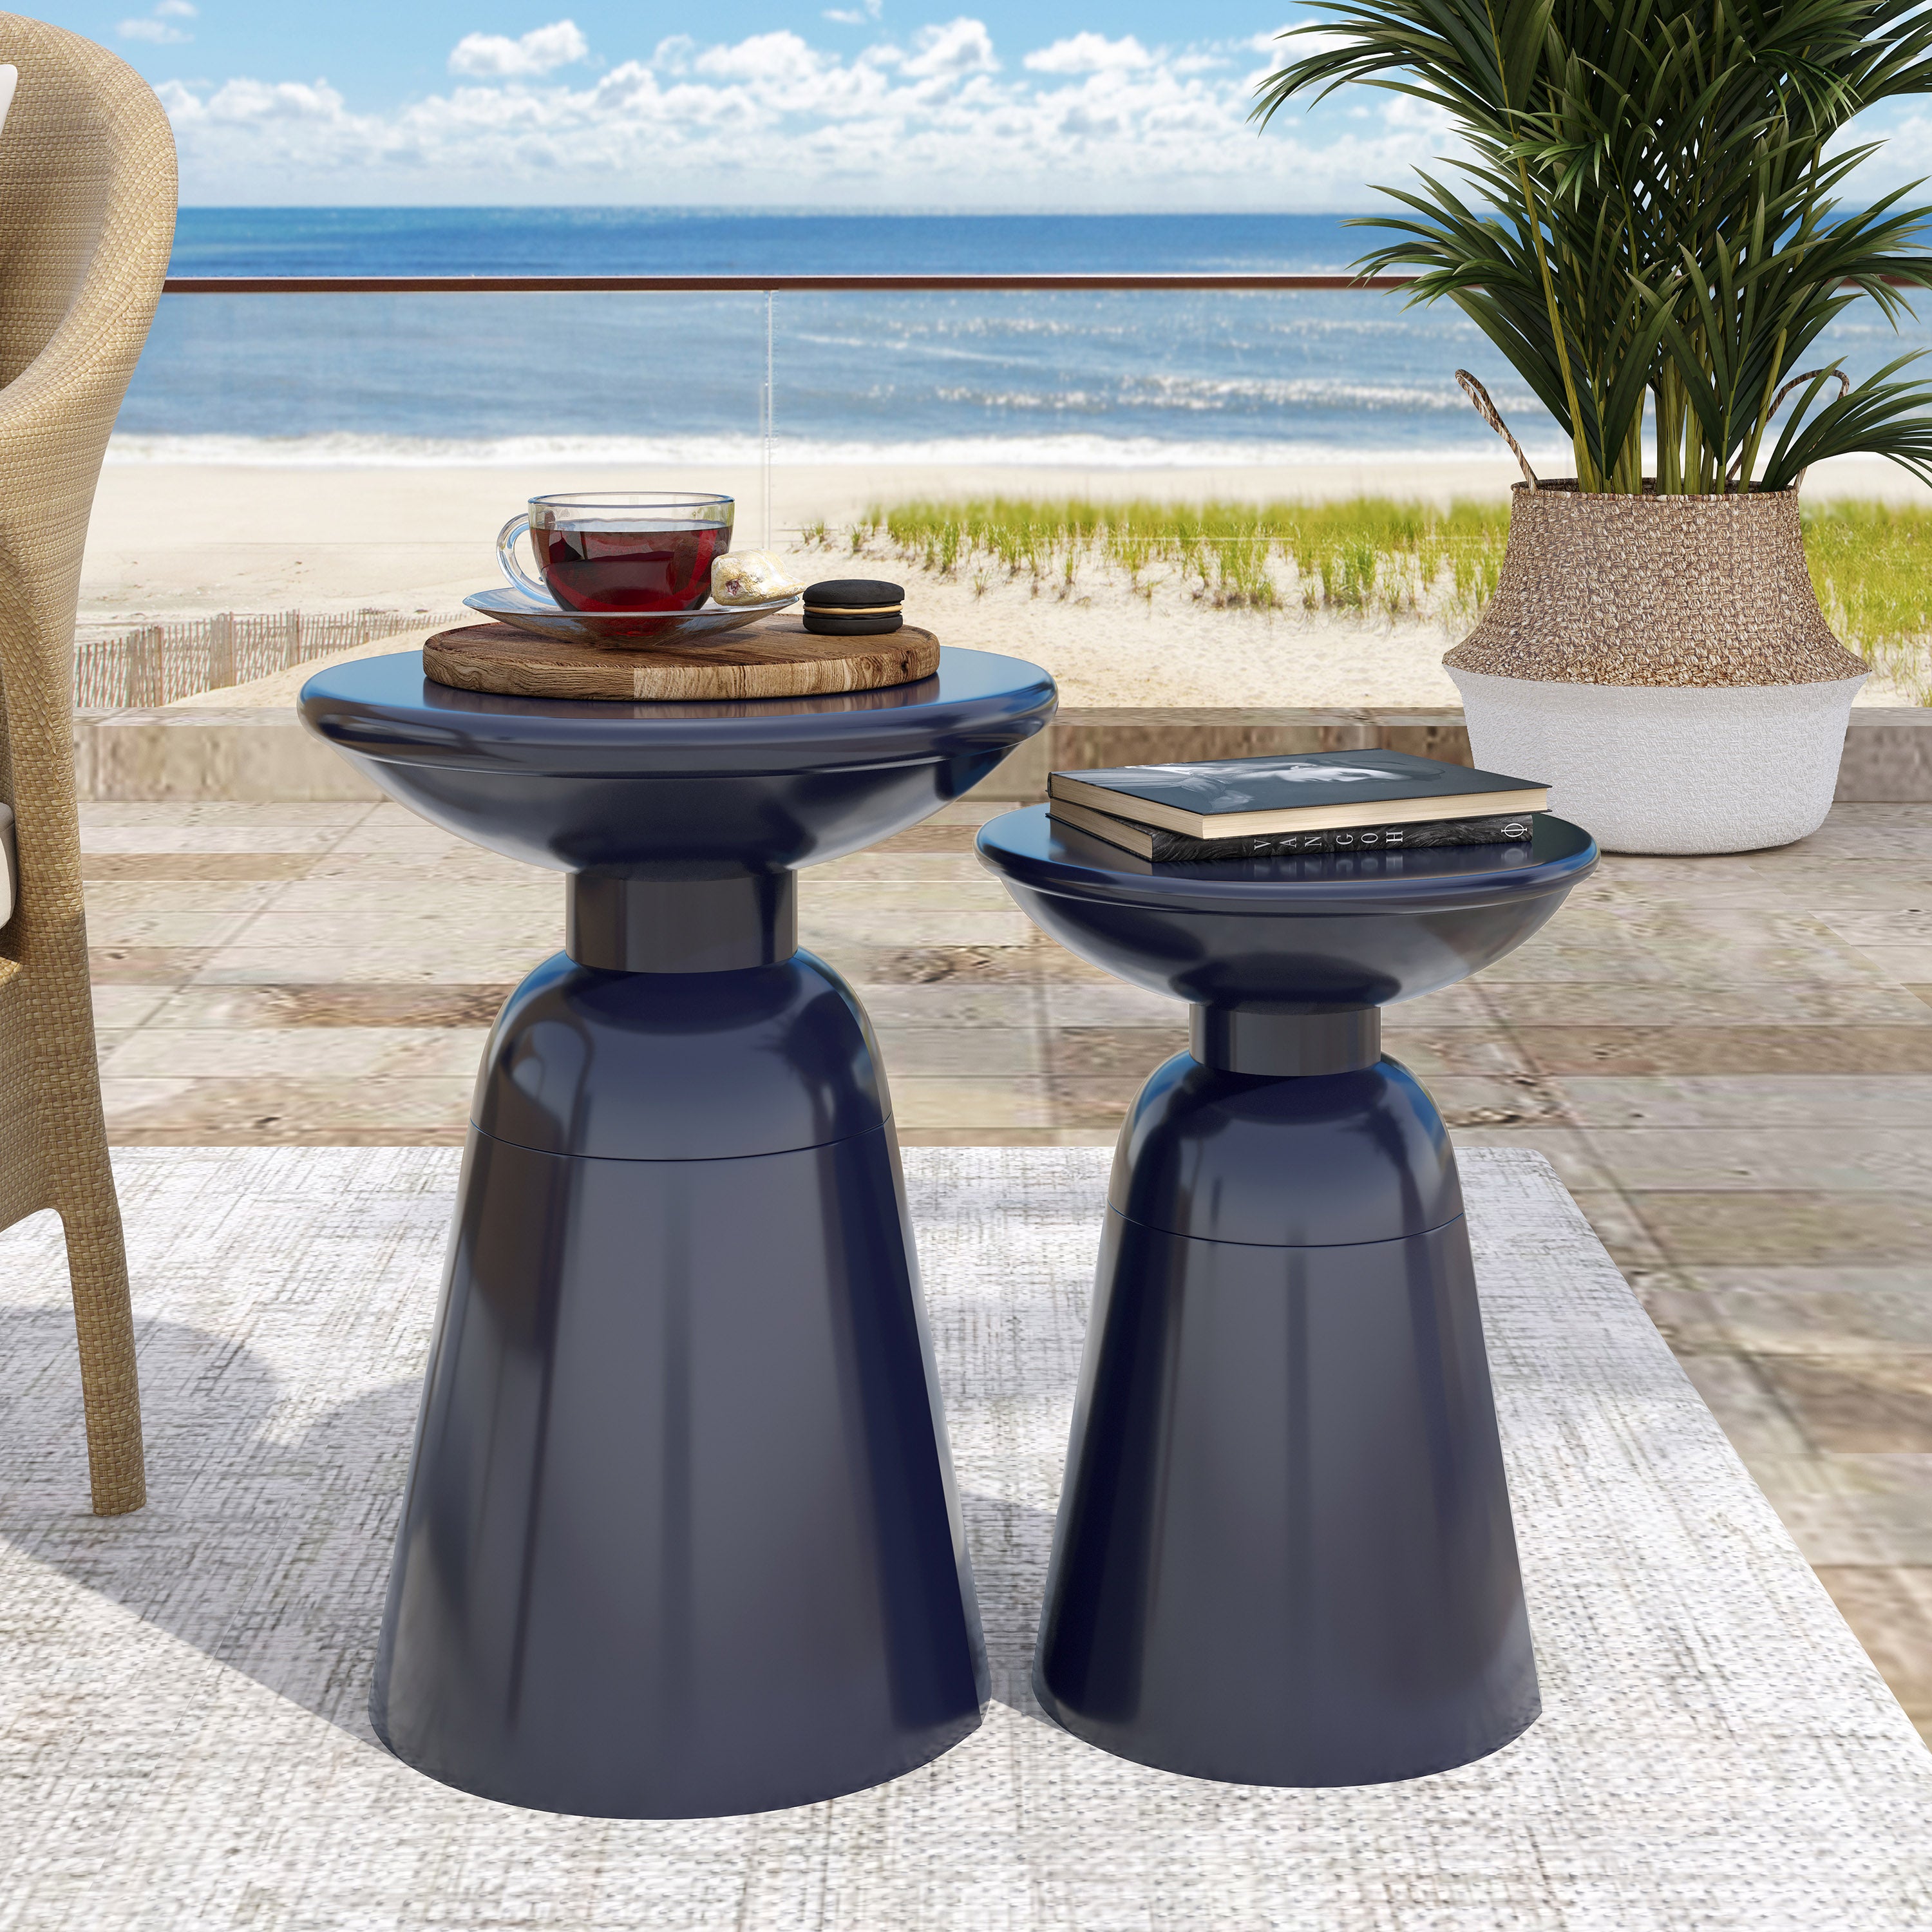 Serenita Outdoor Iron Side Tables with Flared Design, Set of 2